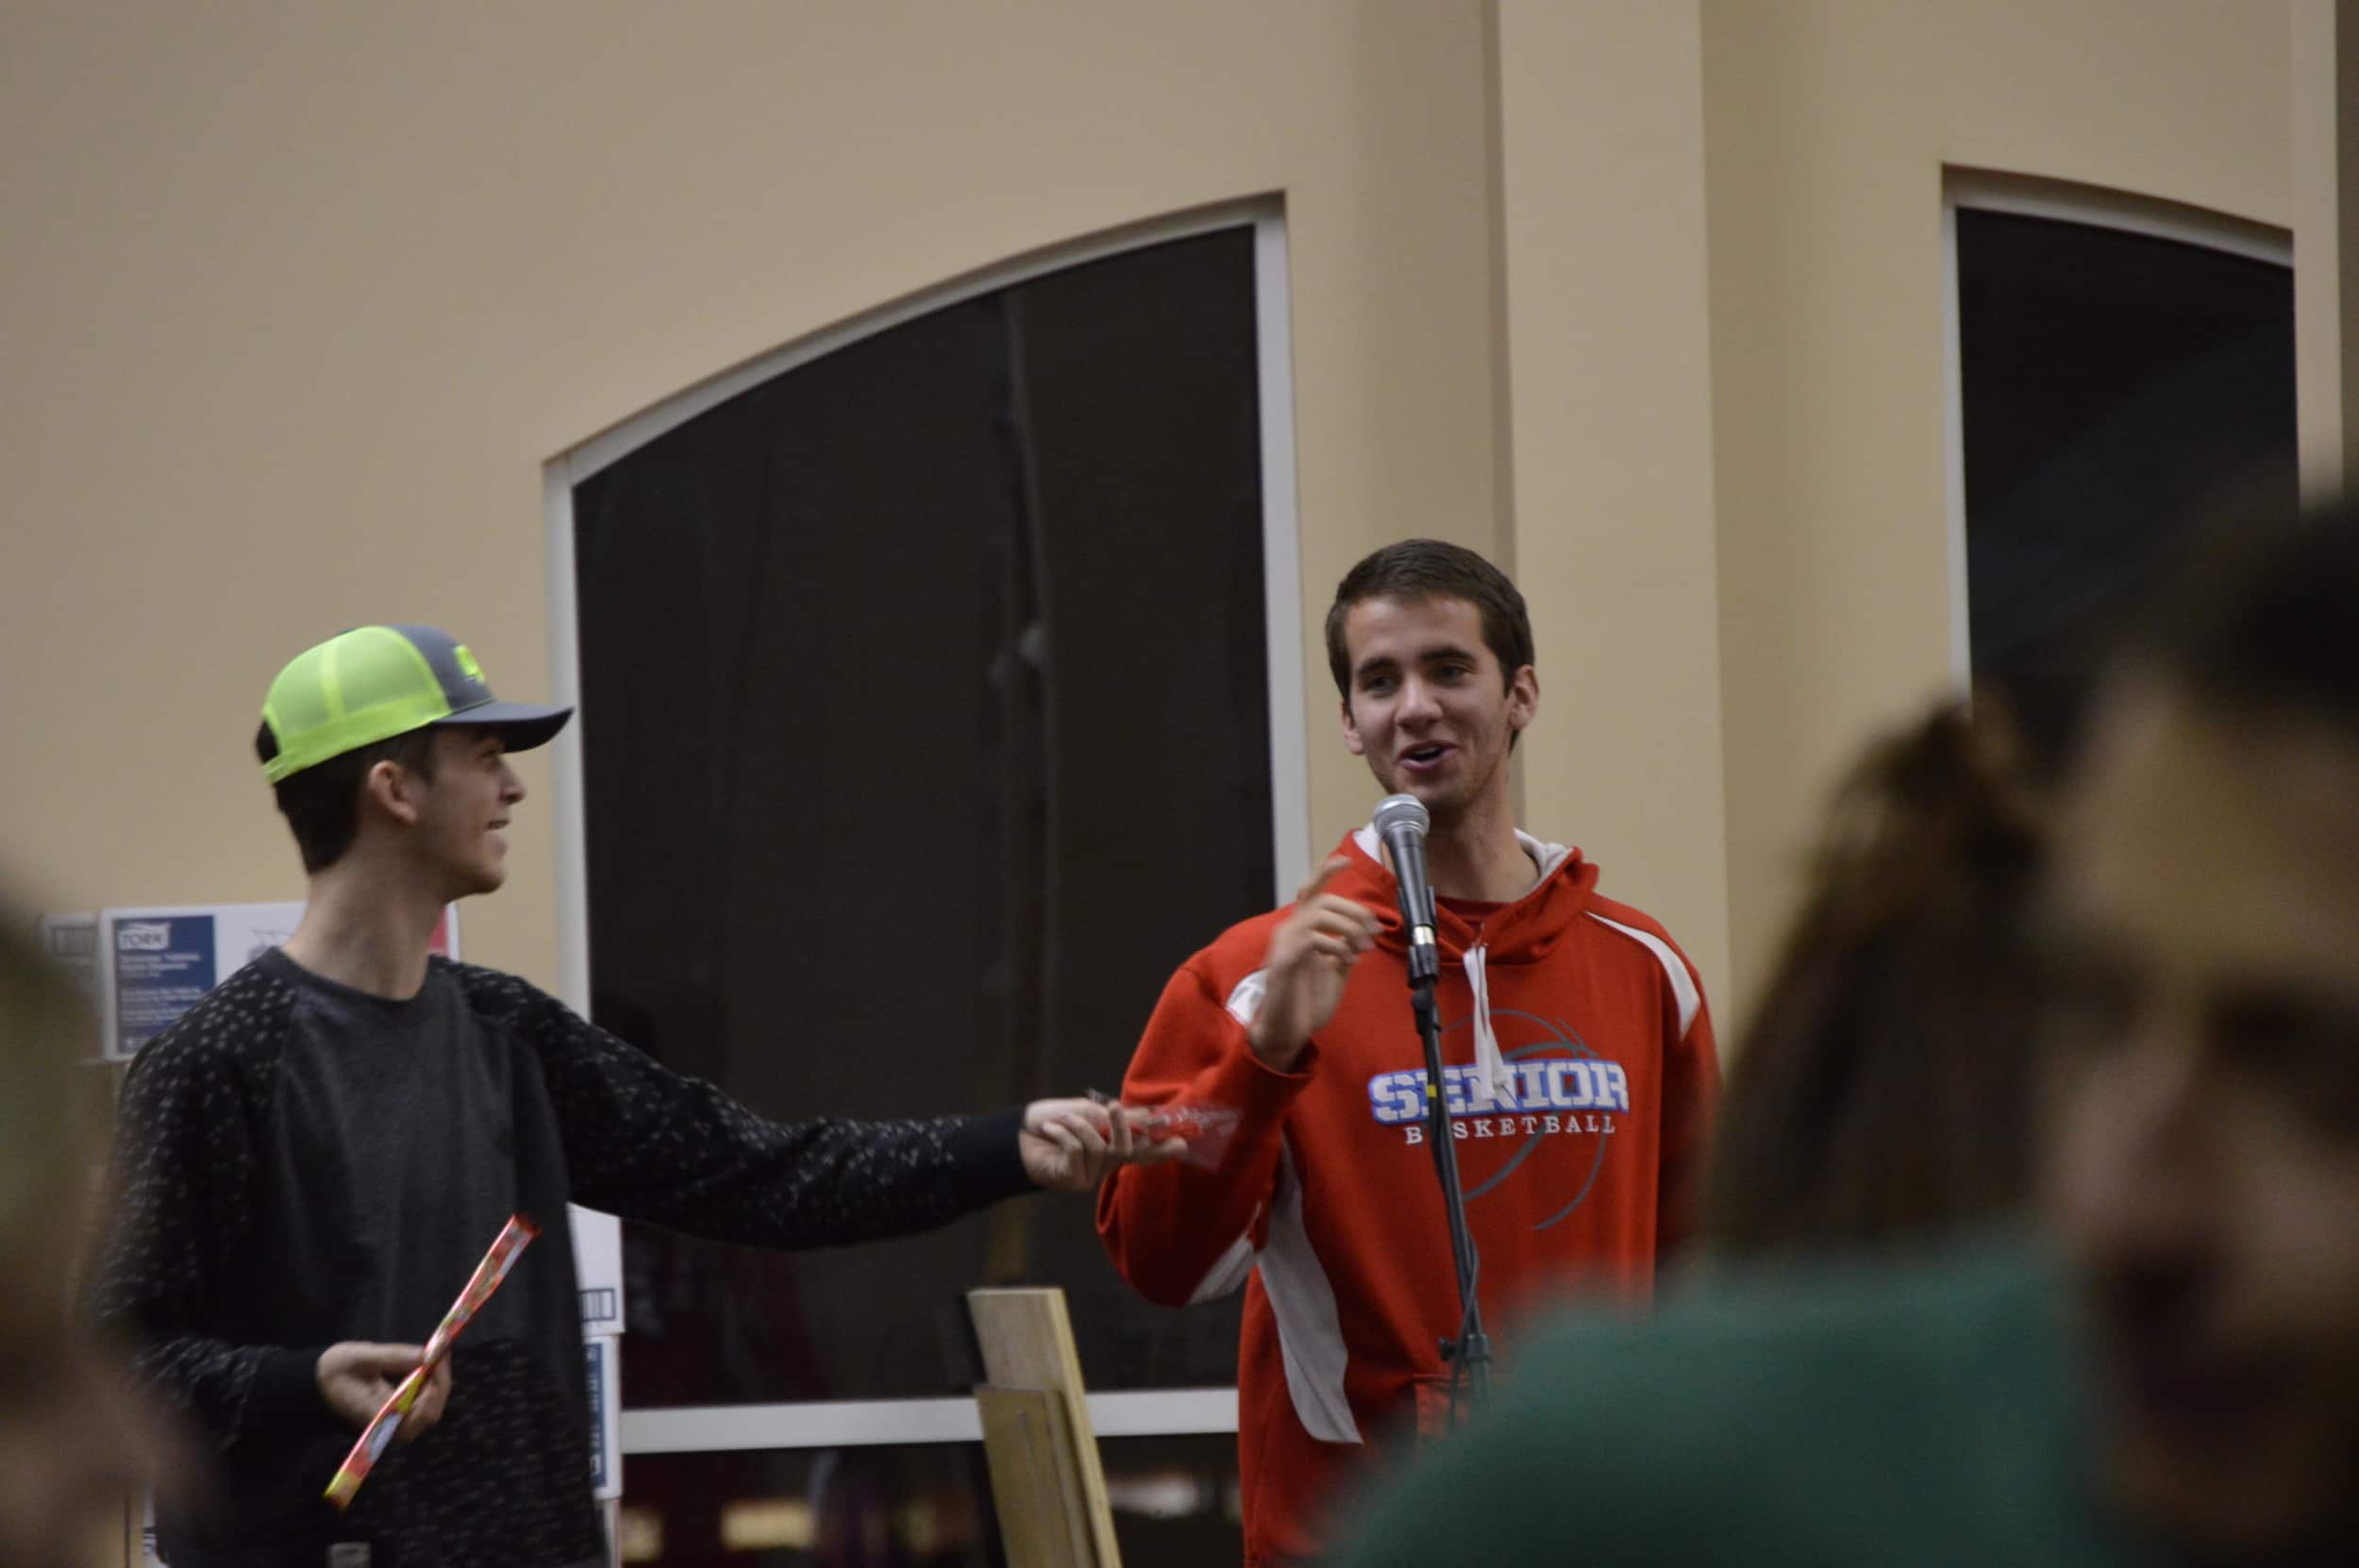 Andrew Guy and Israel Reeves ask Valentine's trivia and give prizes to the winners.